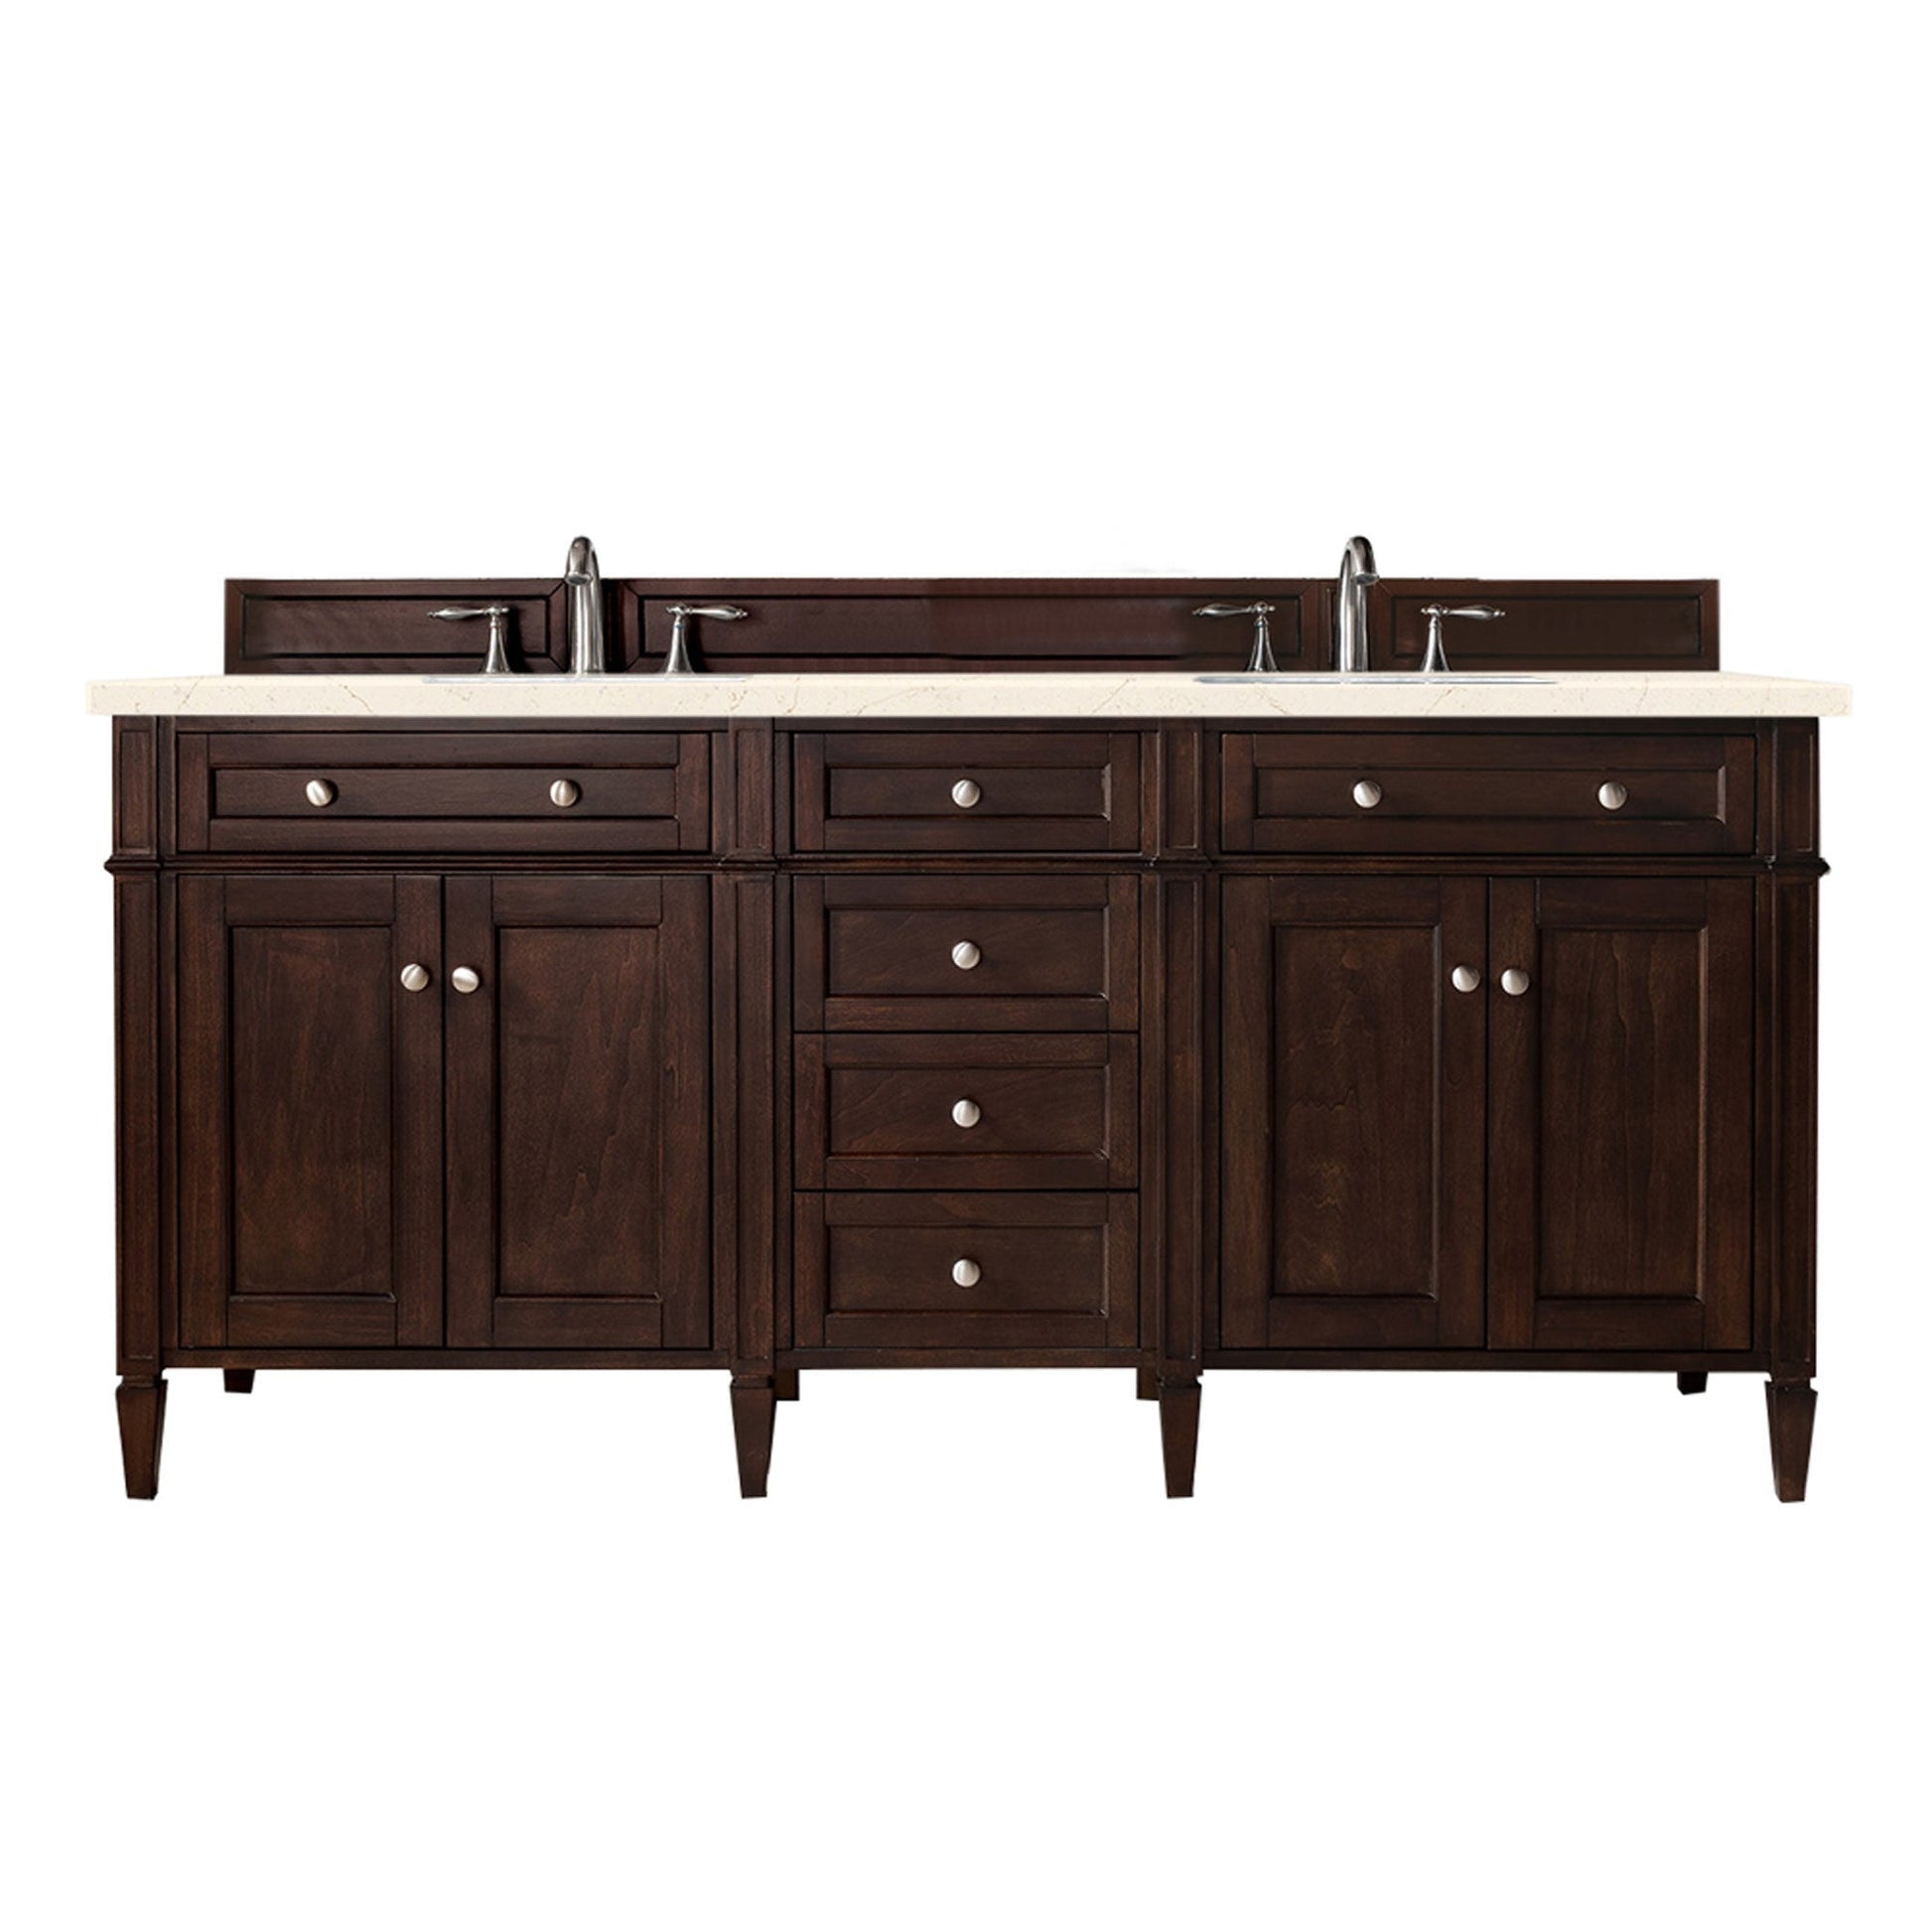 James Martin Vanities Brittany 72" Burnished Mahogany Double Vanity With 3cm Eternal Marfil Quartz Top